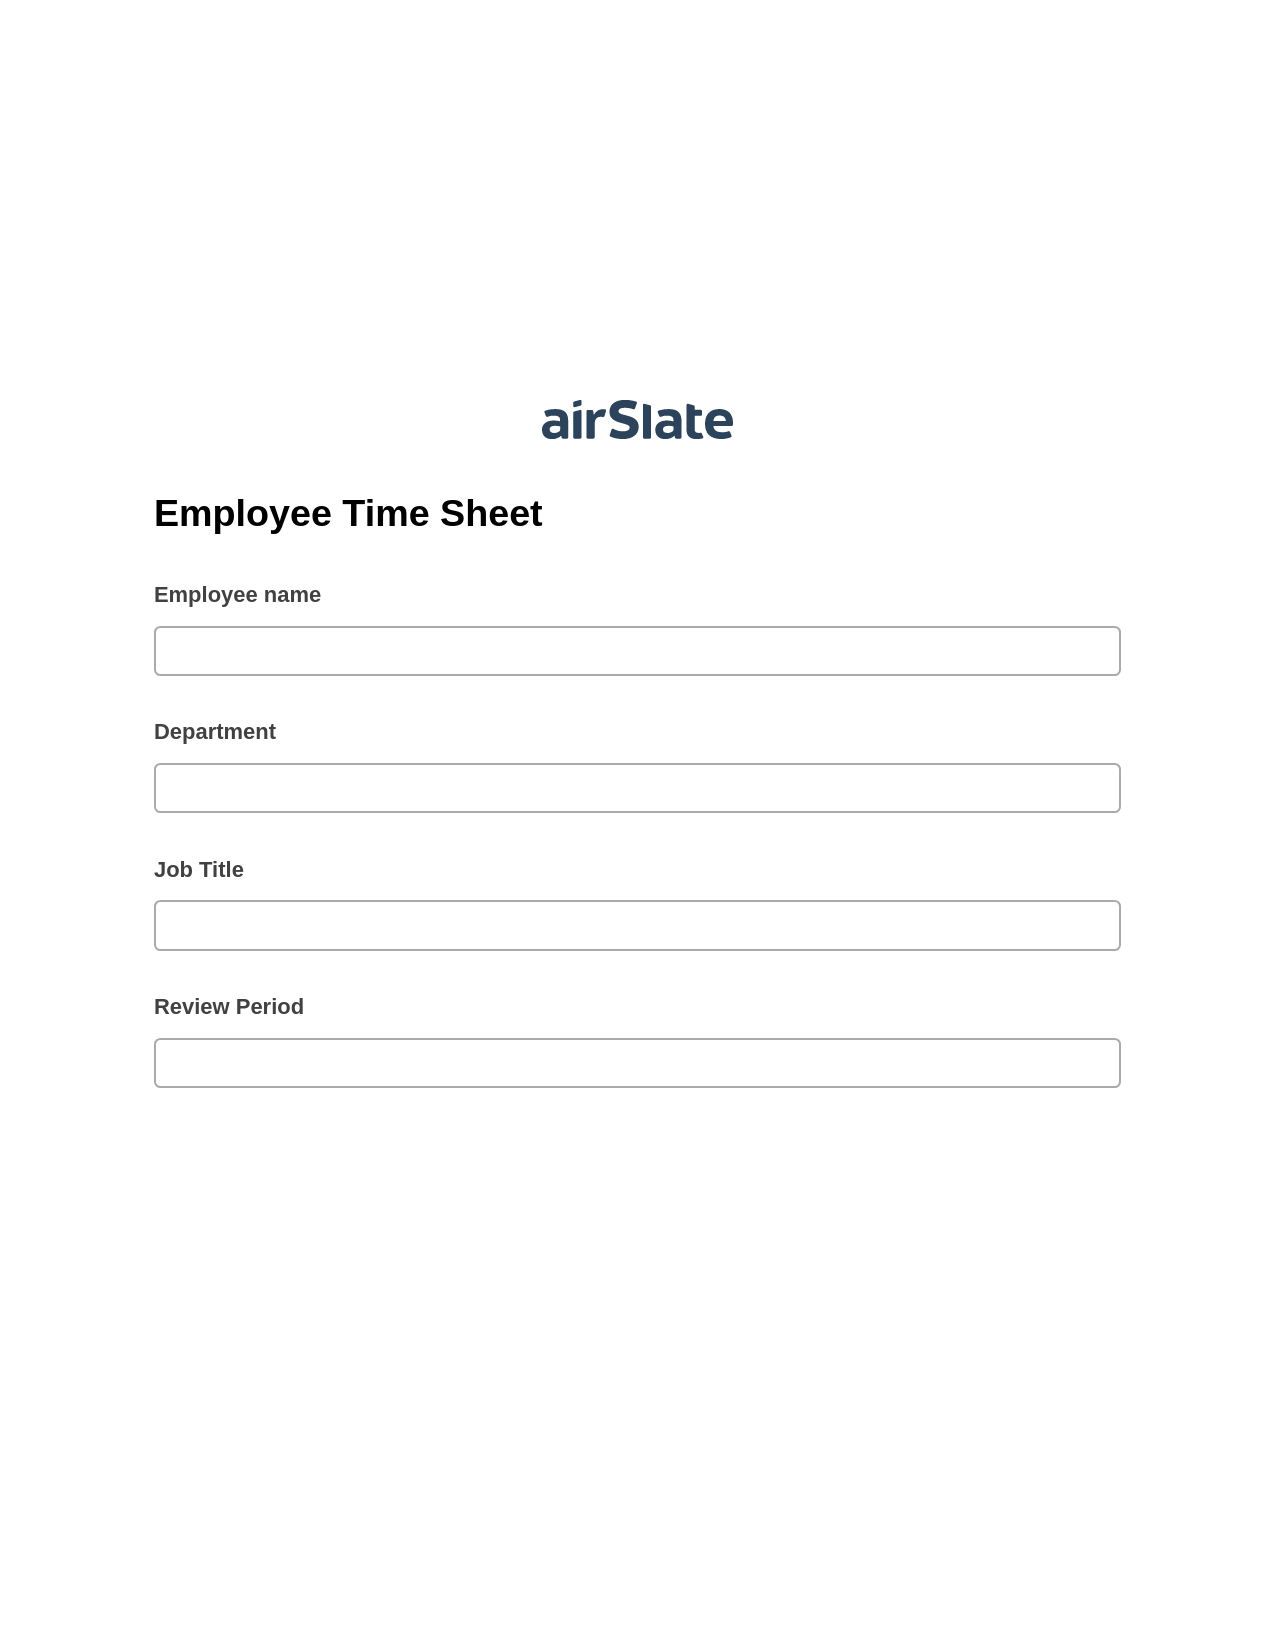 Employee Time Sheet Pre-fill from Salesforce Records with SOQL Bot, Lock the Slate Bot, Export to Salesforce Record Bot